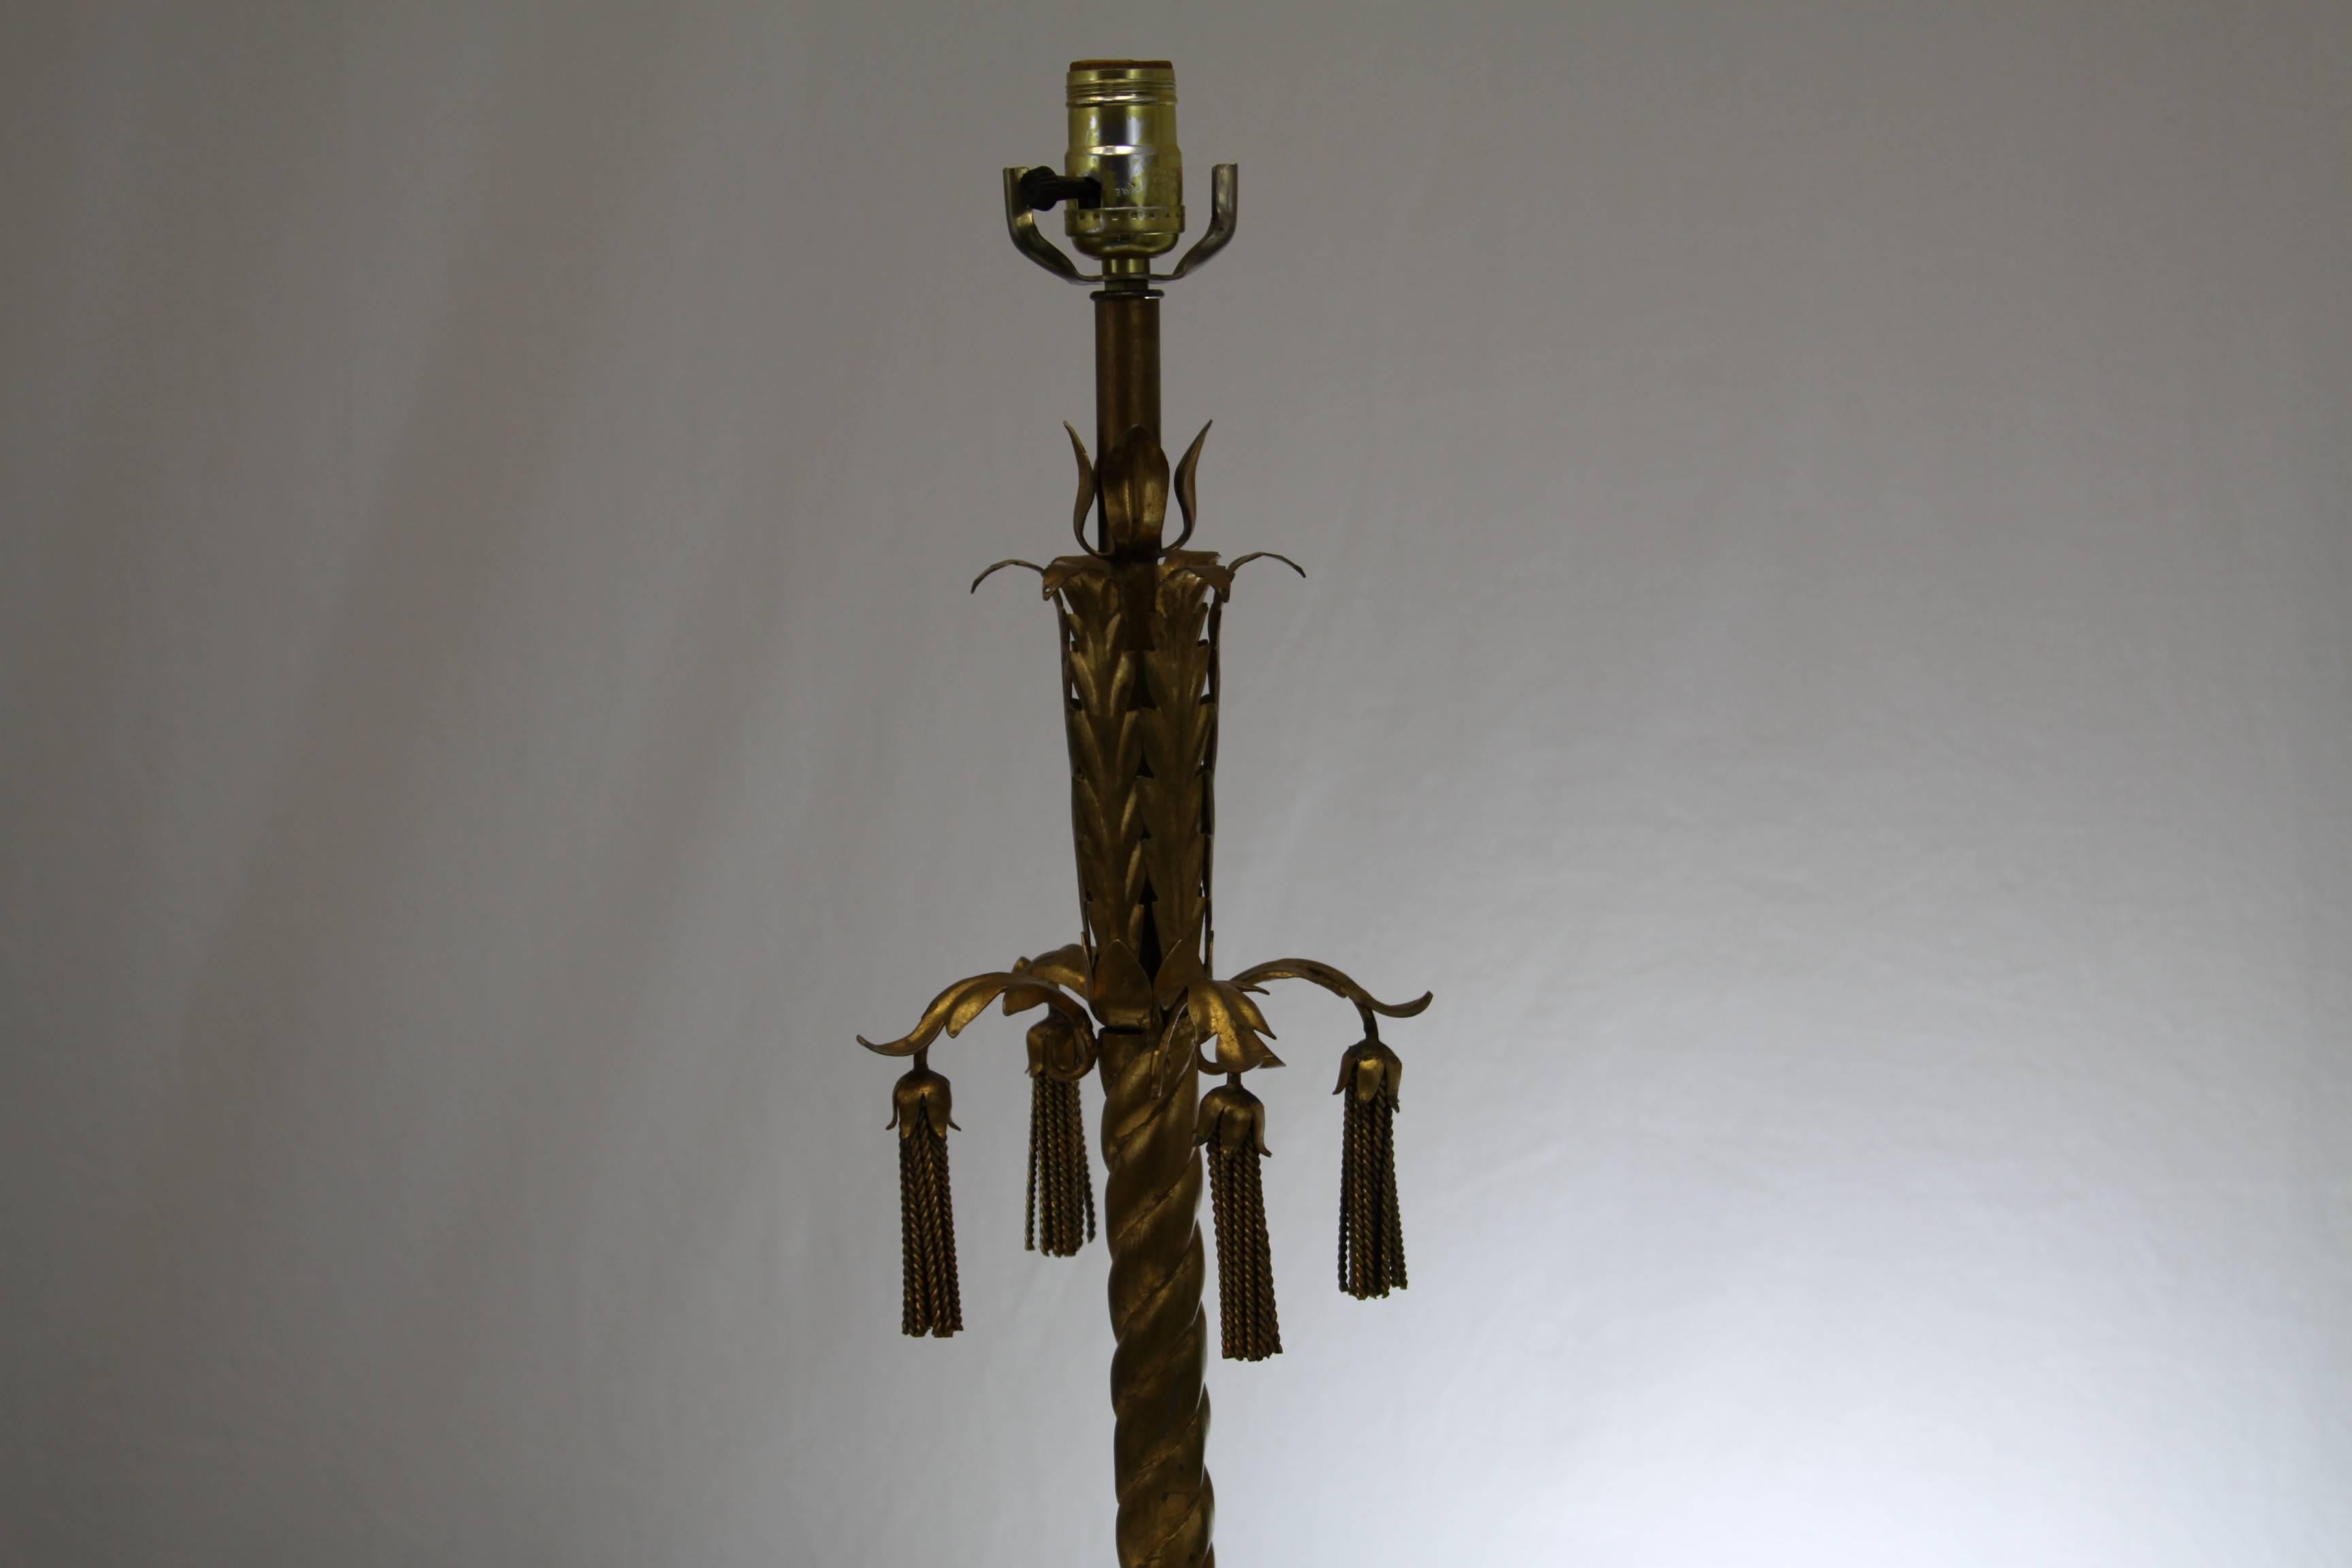 Hollywood Regency style gilt Italian tassel lamp with marble base, metal tassels, acanthus leaves. All gilt. Excellent condition.